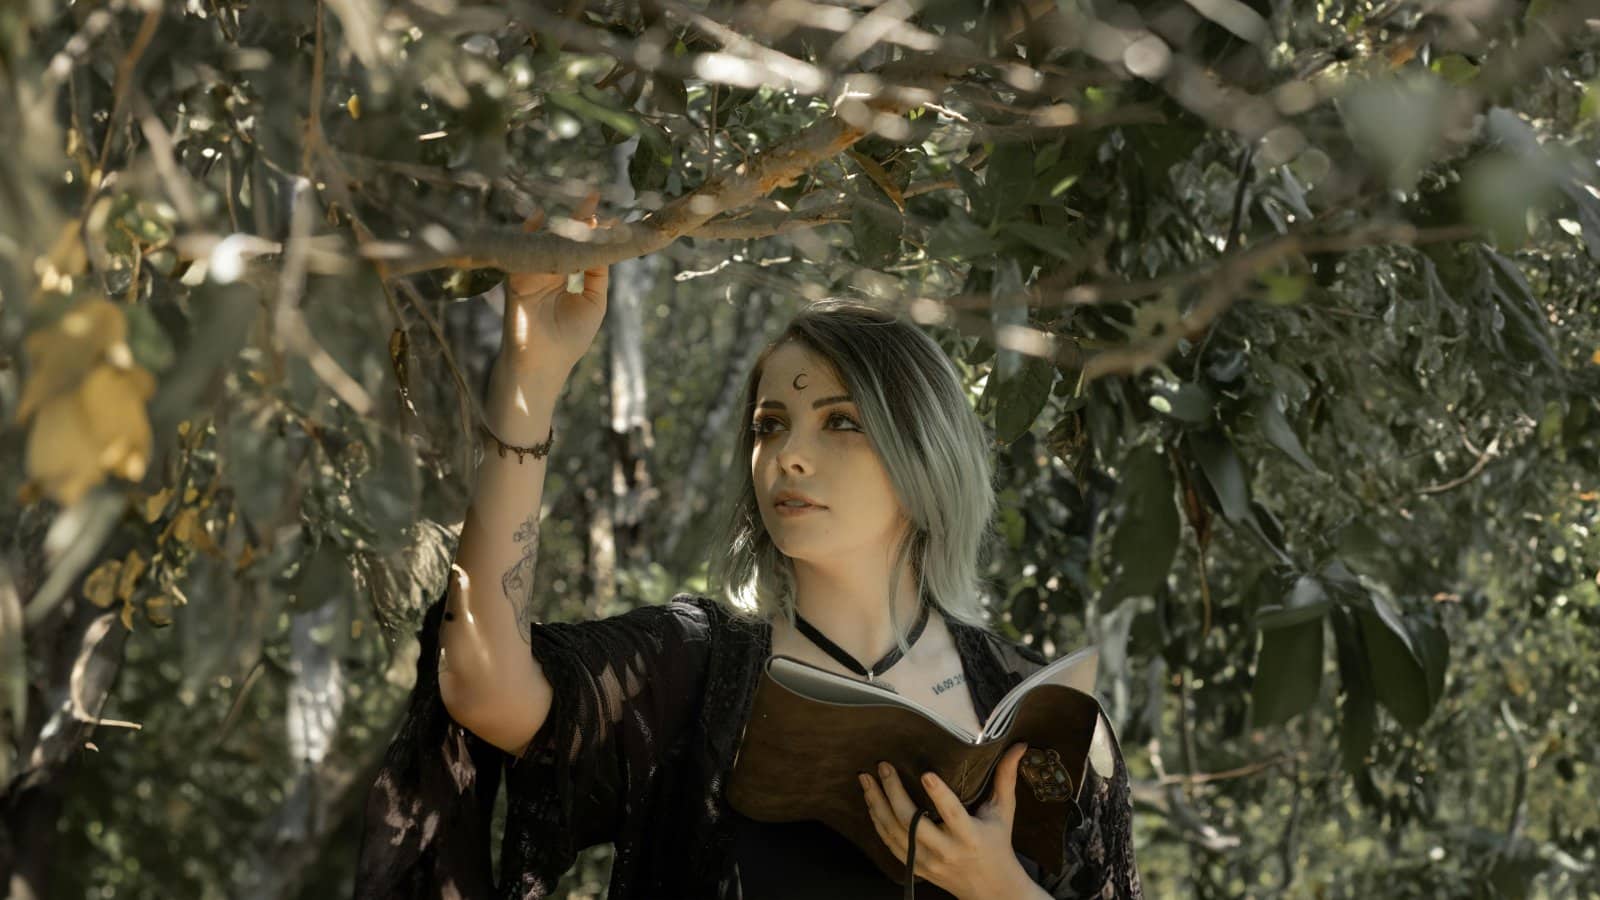 Image Credit: Pexel / Leonardo Pavão <p>Followers of Neopagan paths like Wicca and Druidism find solace in nature worship and ancient rituals, providing an eco-friendly alternative to the fire-and-brimstone of traditional sermons.</p>